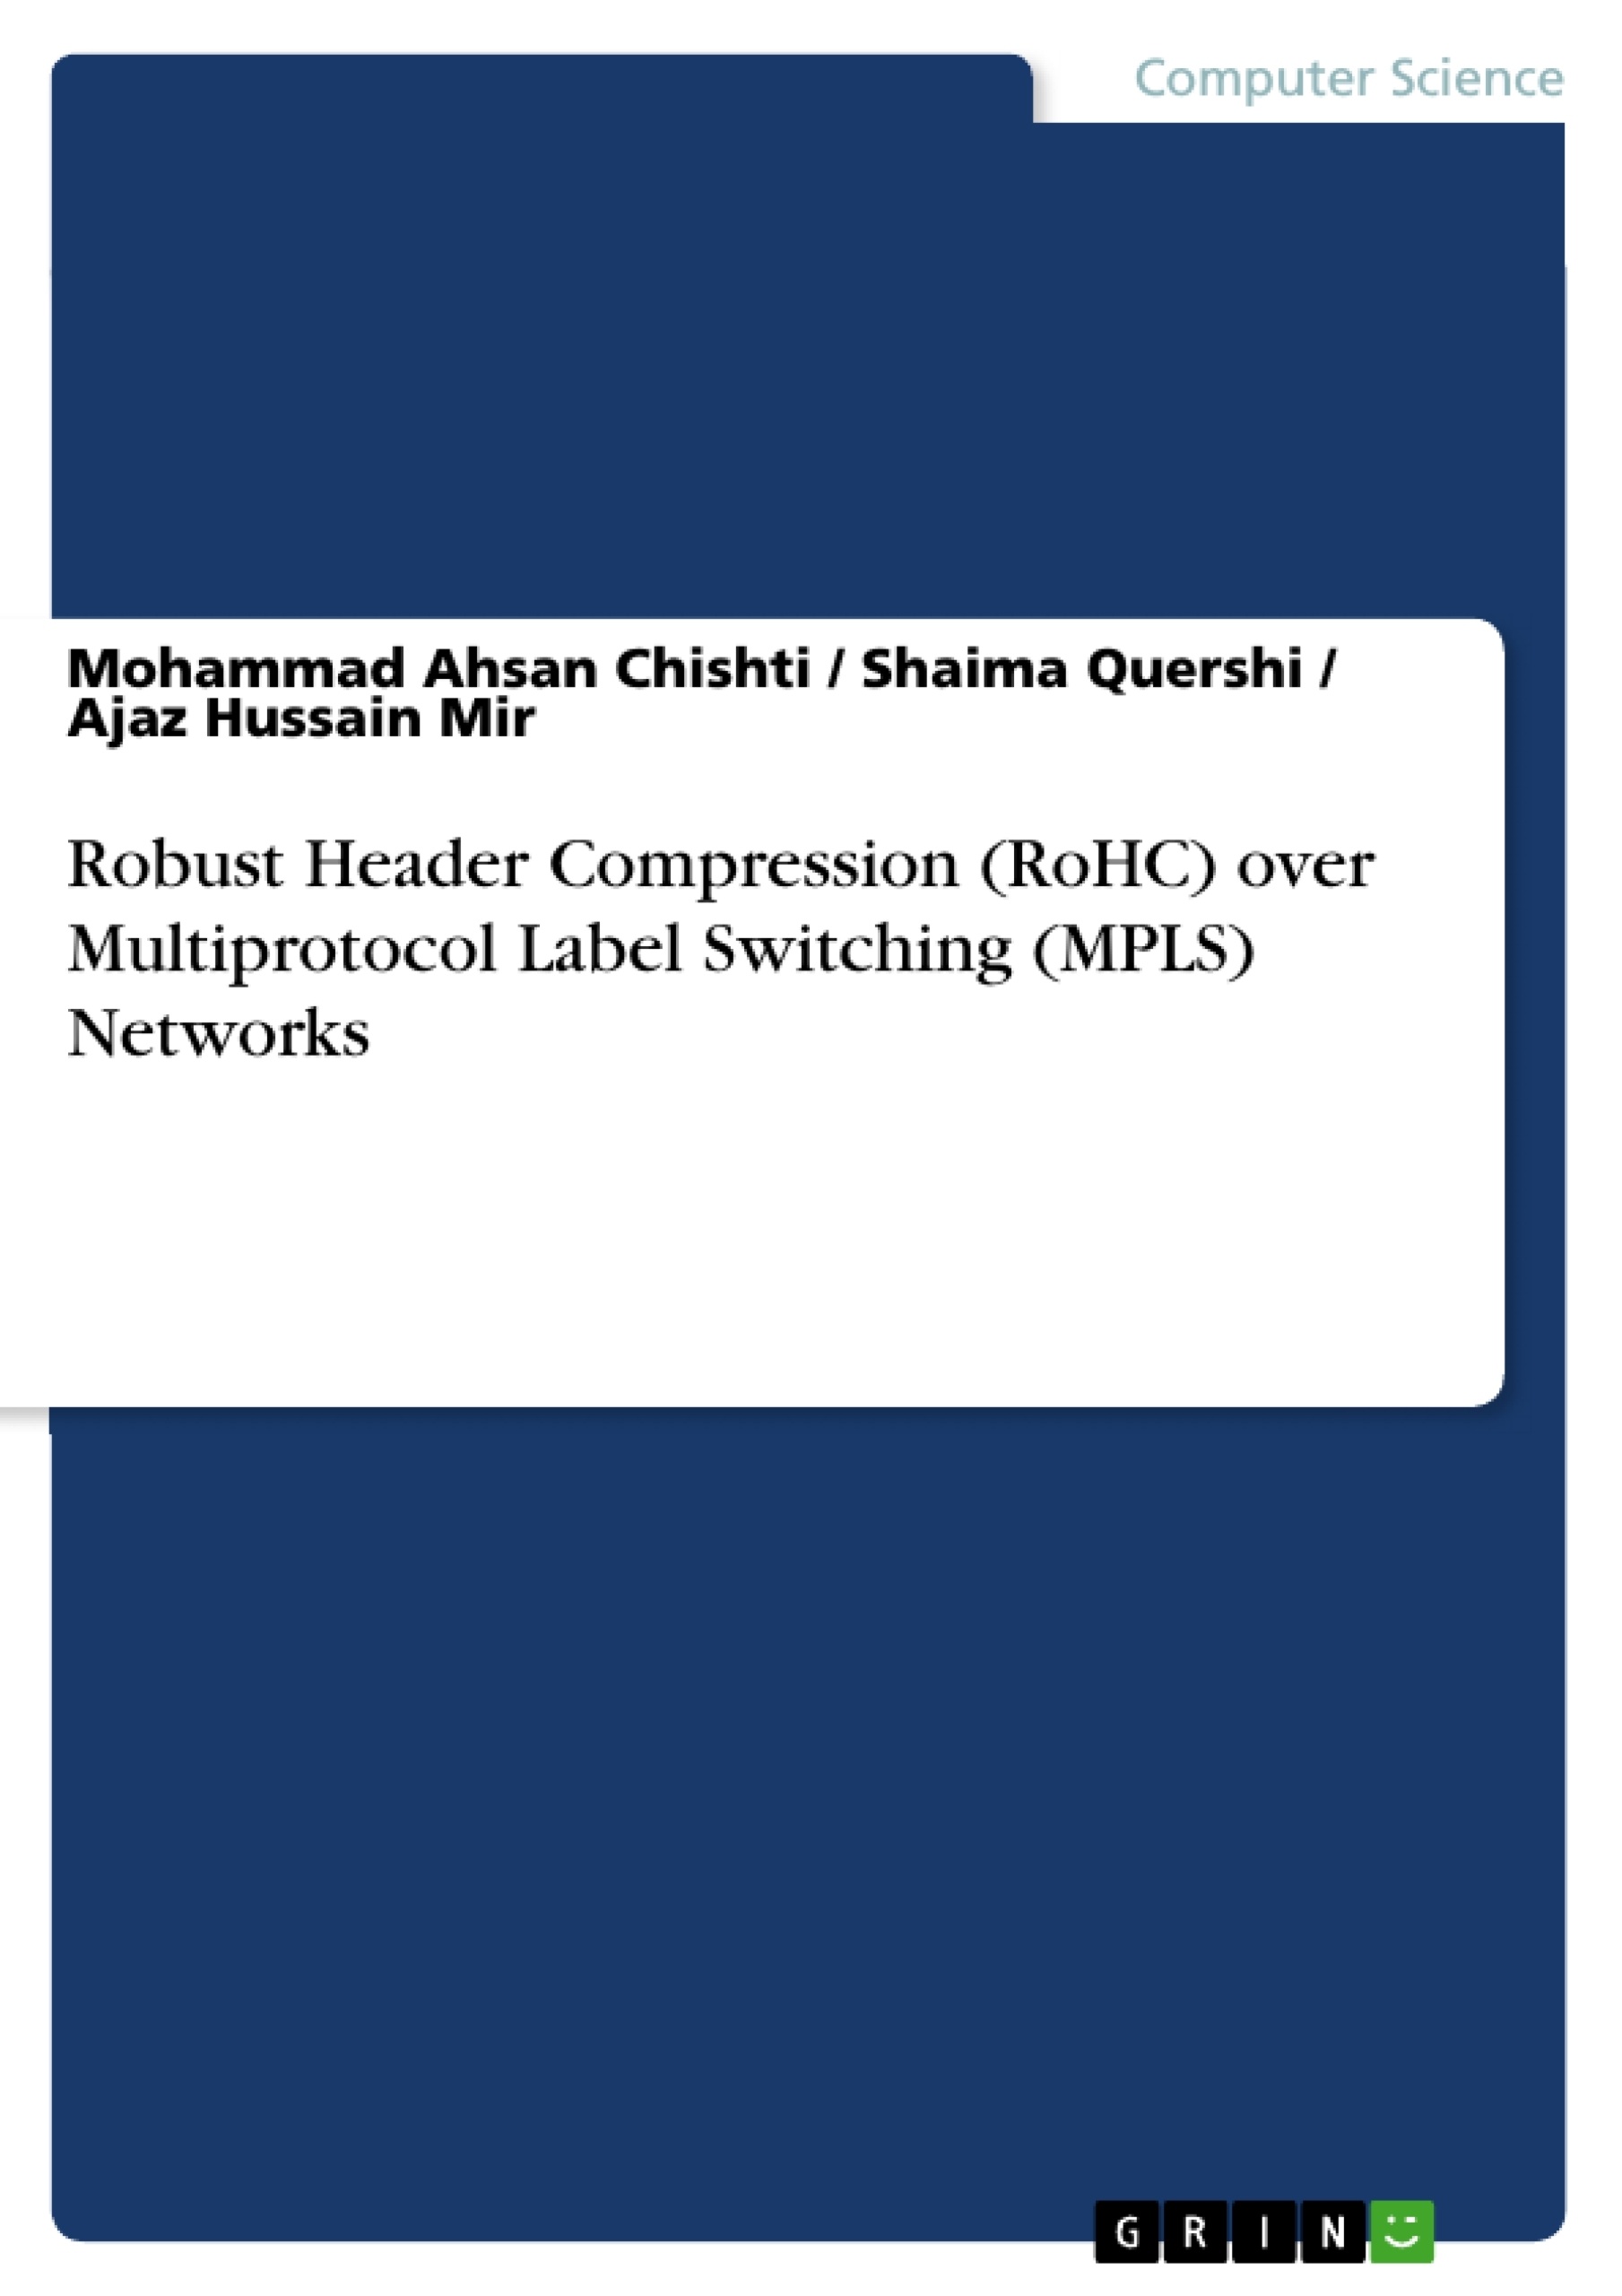 Title: Robust Header Compression (RoHC) over Multiprotocol Label Switching (MPLS) Networks